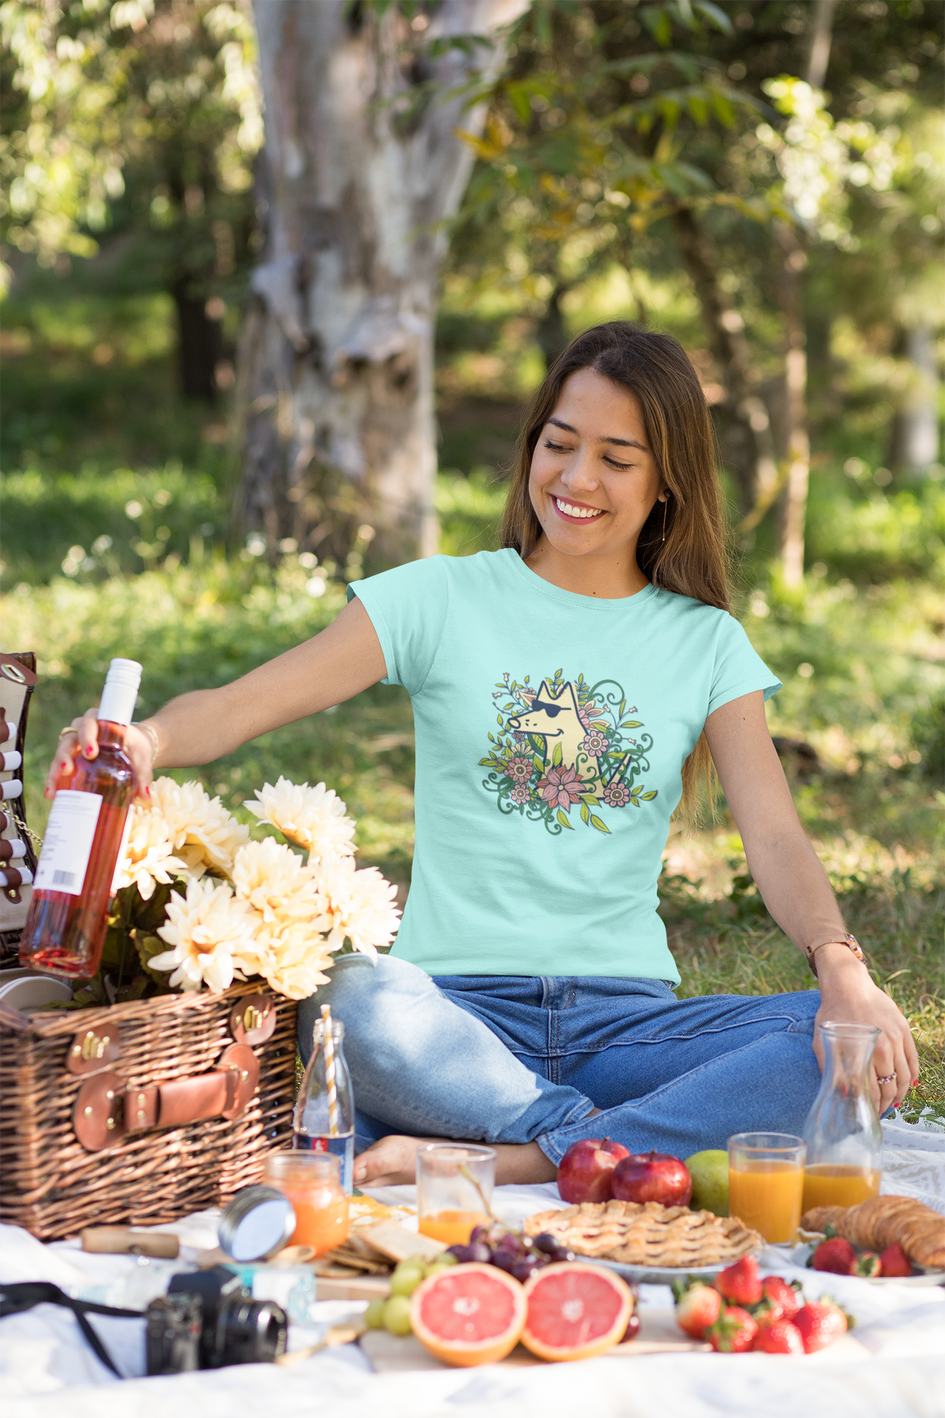 Stop And Smell The Flowers - Classic Tee